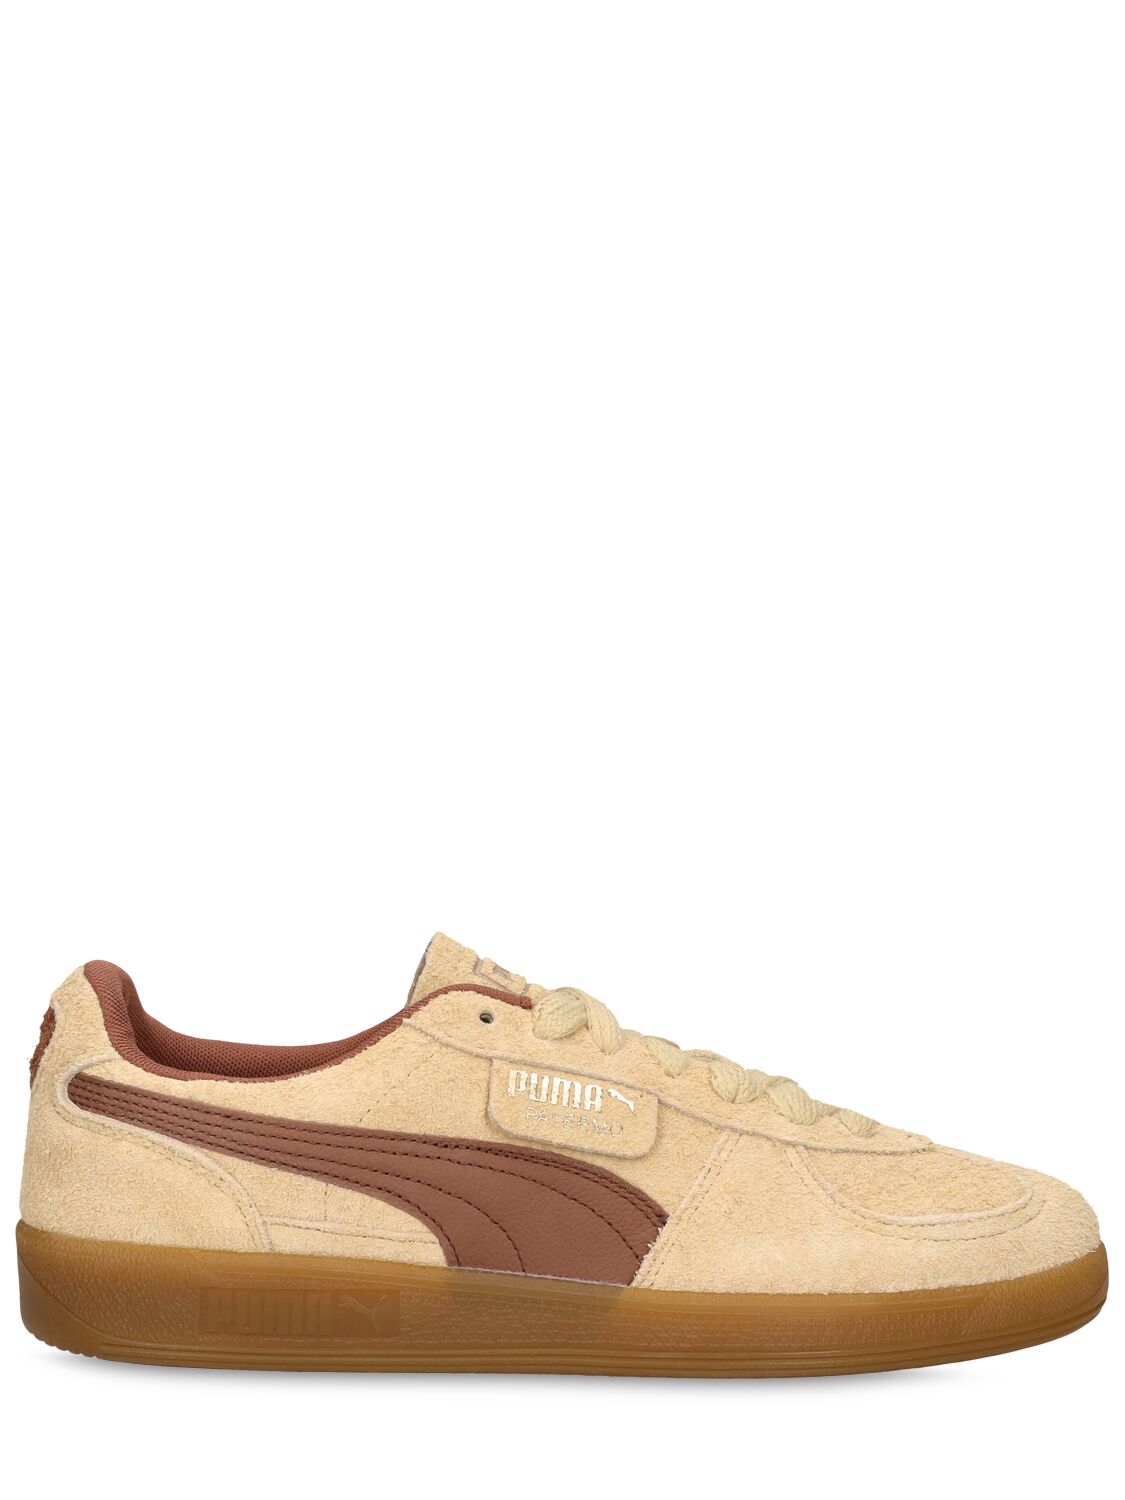 Puma Palermo Hairy Sneakers In Chamomile,brown